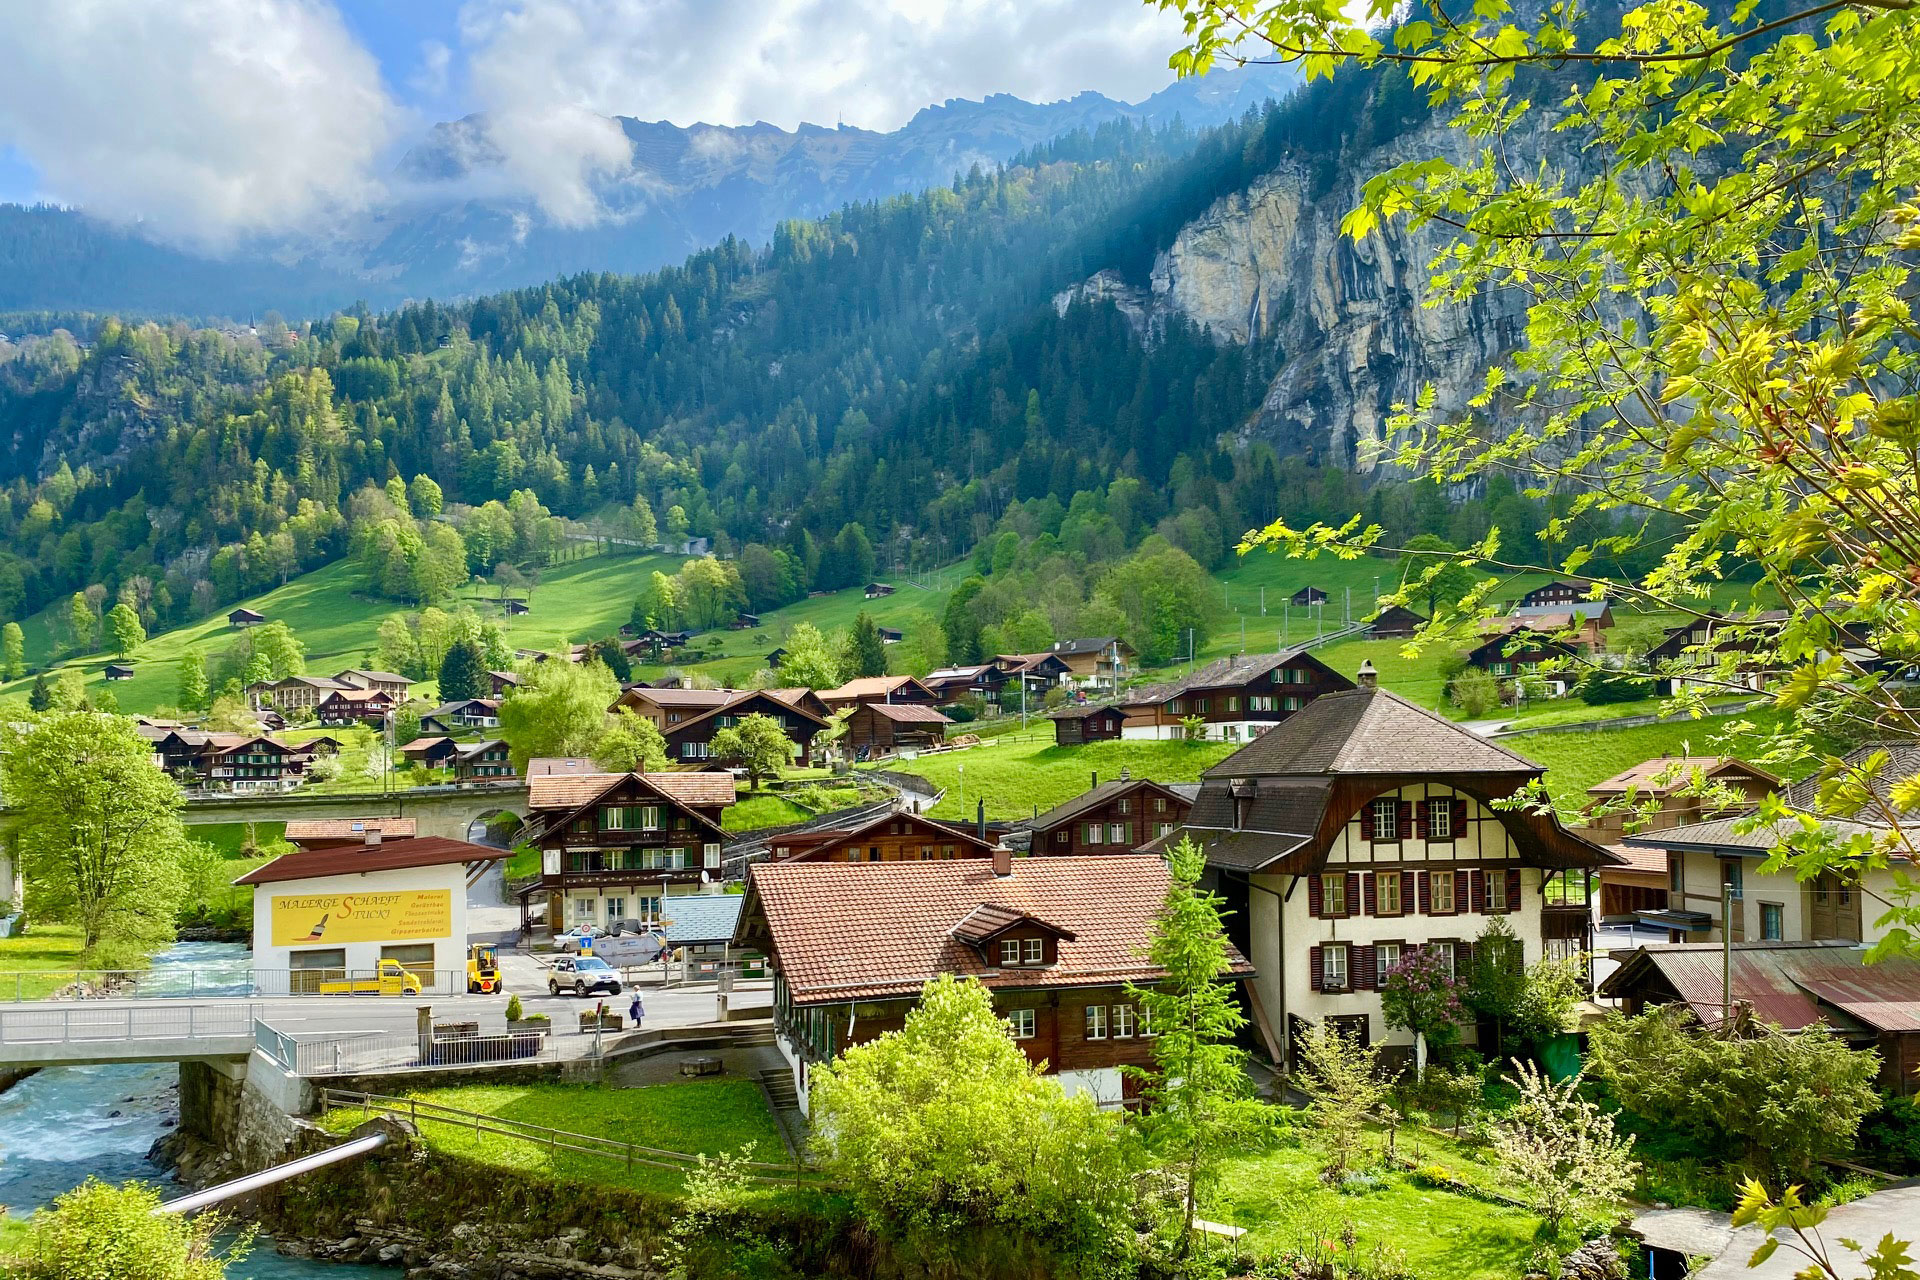 Best of Bernese Alps Private Day Tour: Visit of Lauterbrunnen, Mürren, Grindelwald, Interlaken in the Jungfrau Region (View on Eiger, Mönch and Jungfrau) (from Lucerne)